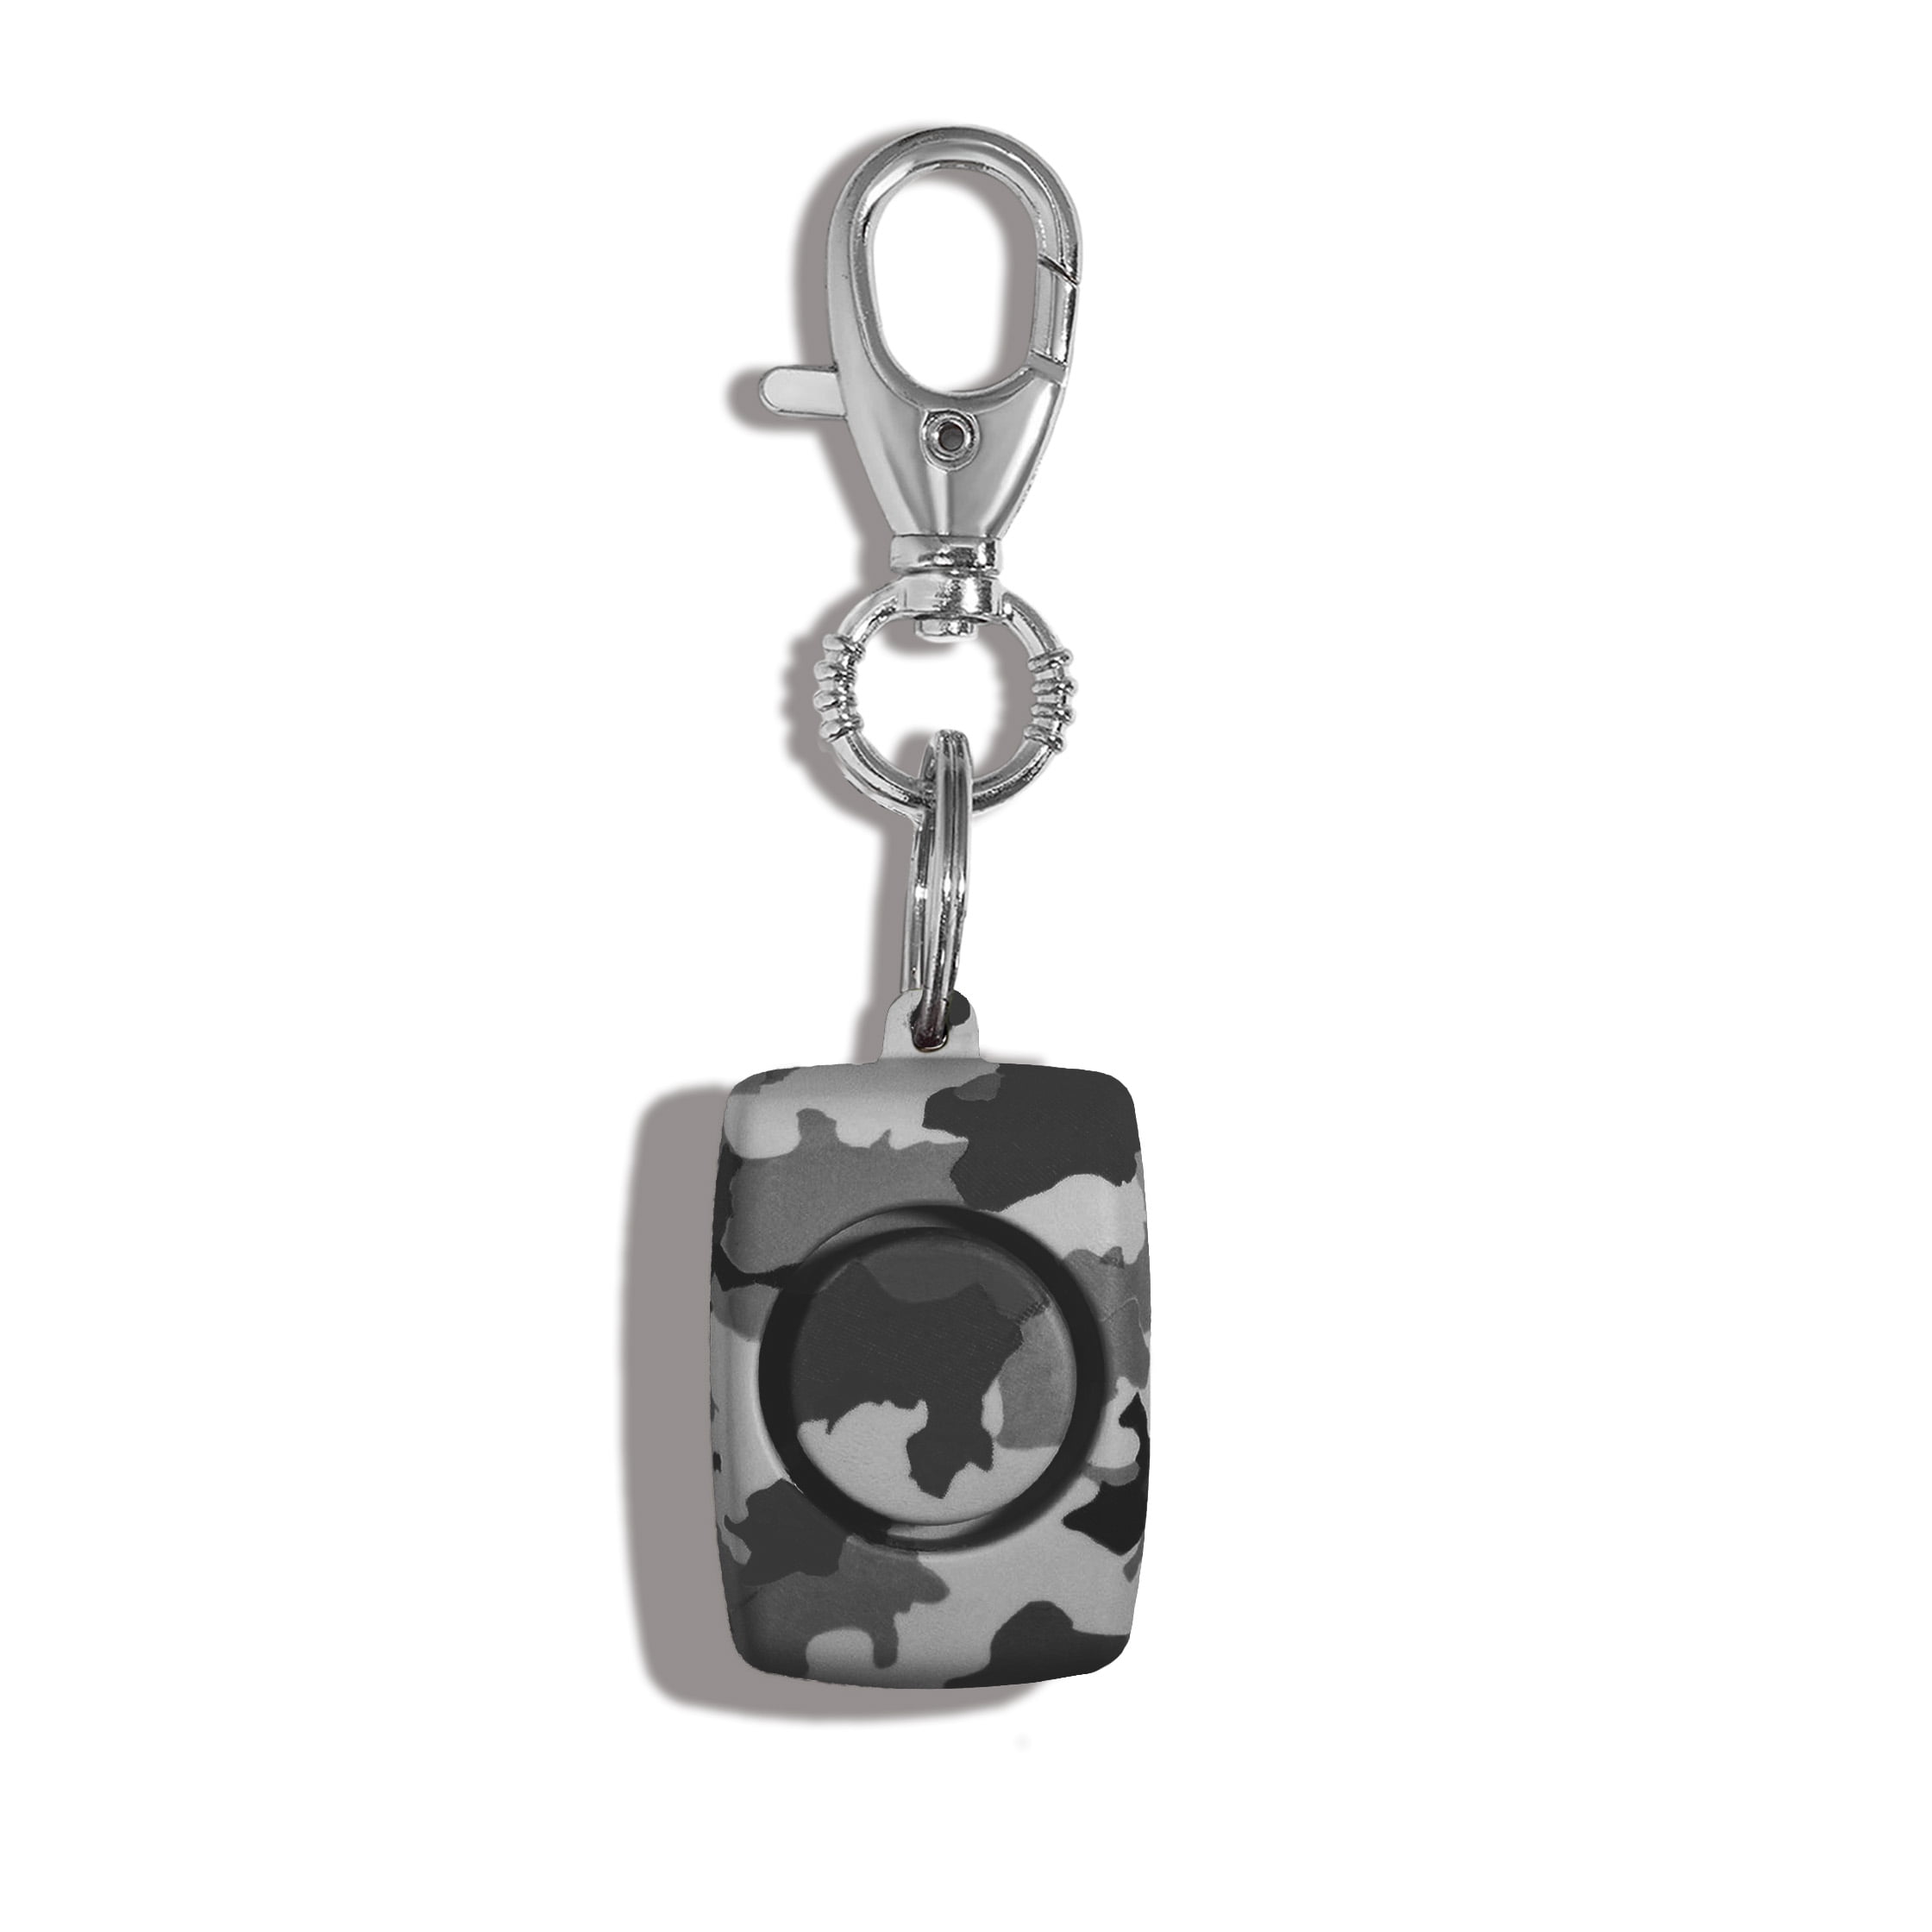 Bling Sting Mini Personal Alarm - Grey Camo - Ramsey Rae by The Magnolia